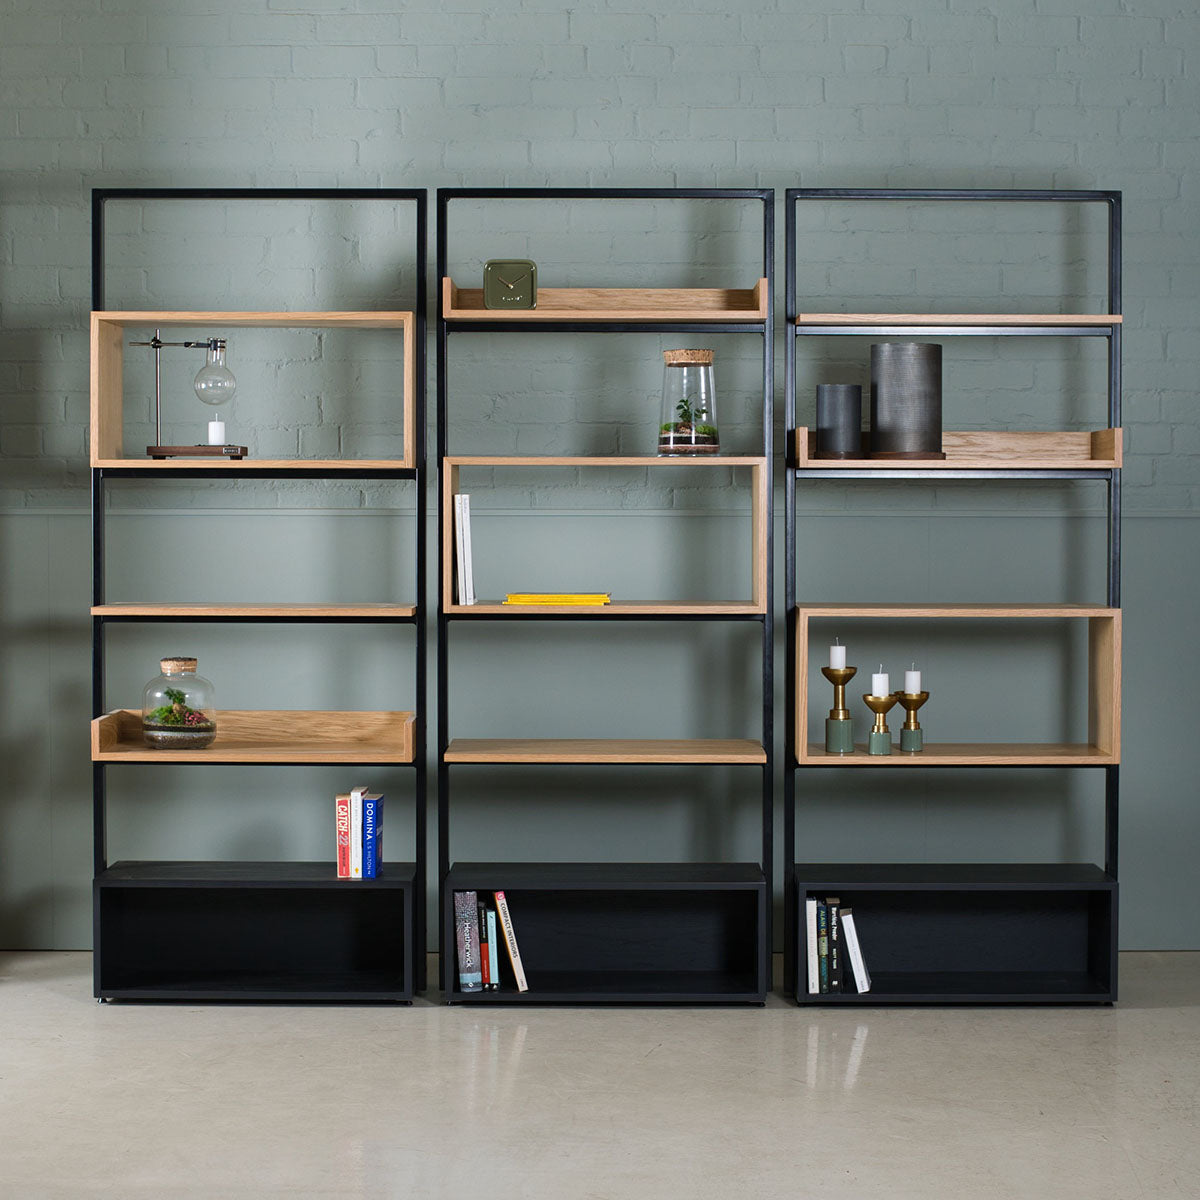 An image of the Oak Shelving Units, Iva product available from Koda Studios